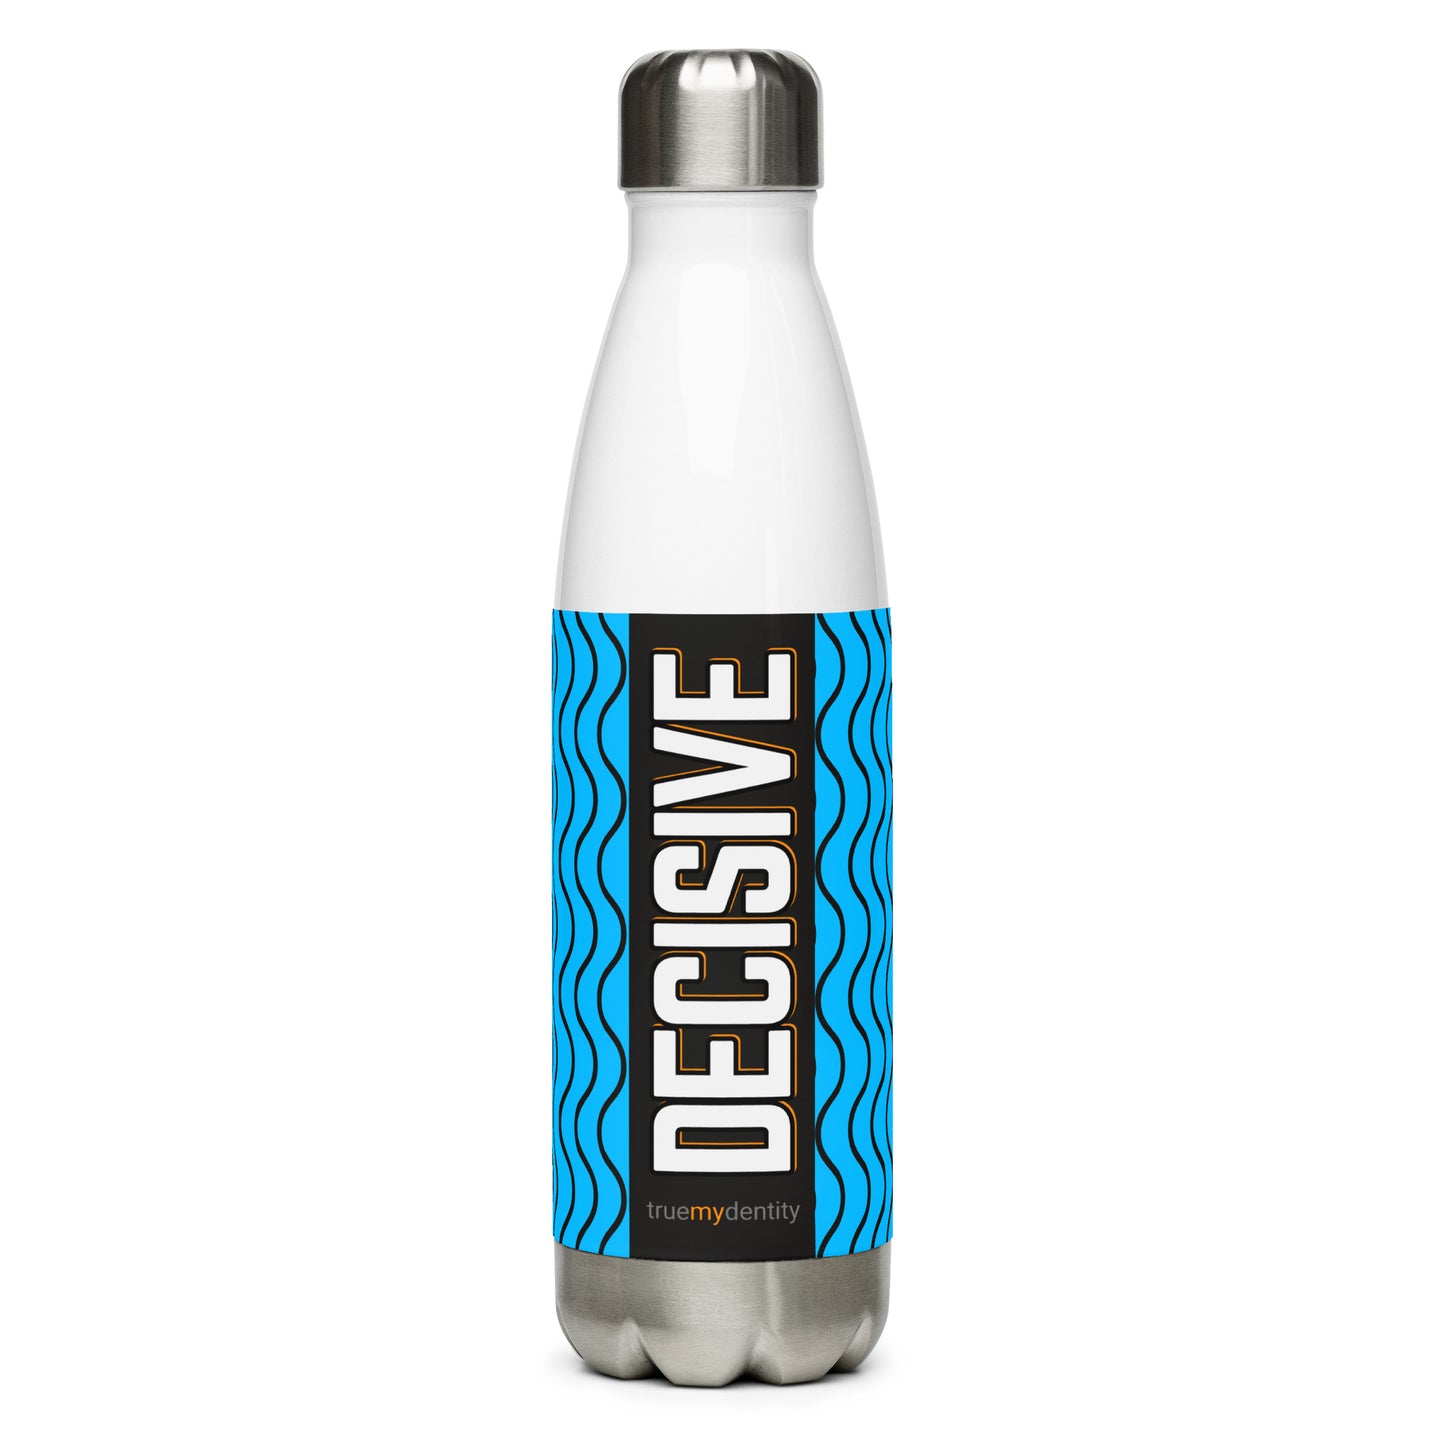 DECISIVE Stainless Steel Water Bottle Blue Wave Design, 17 oz, in Black or White